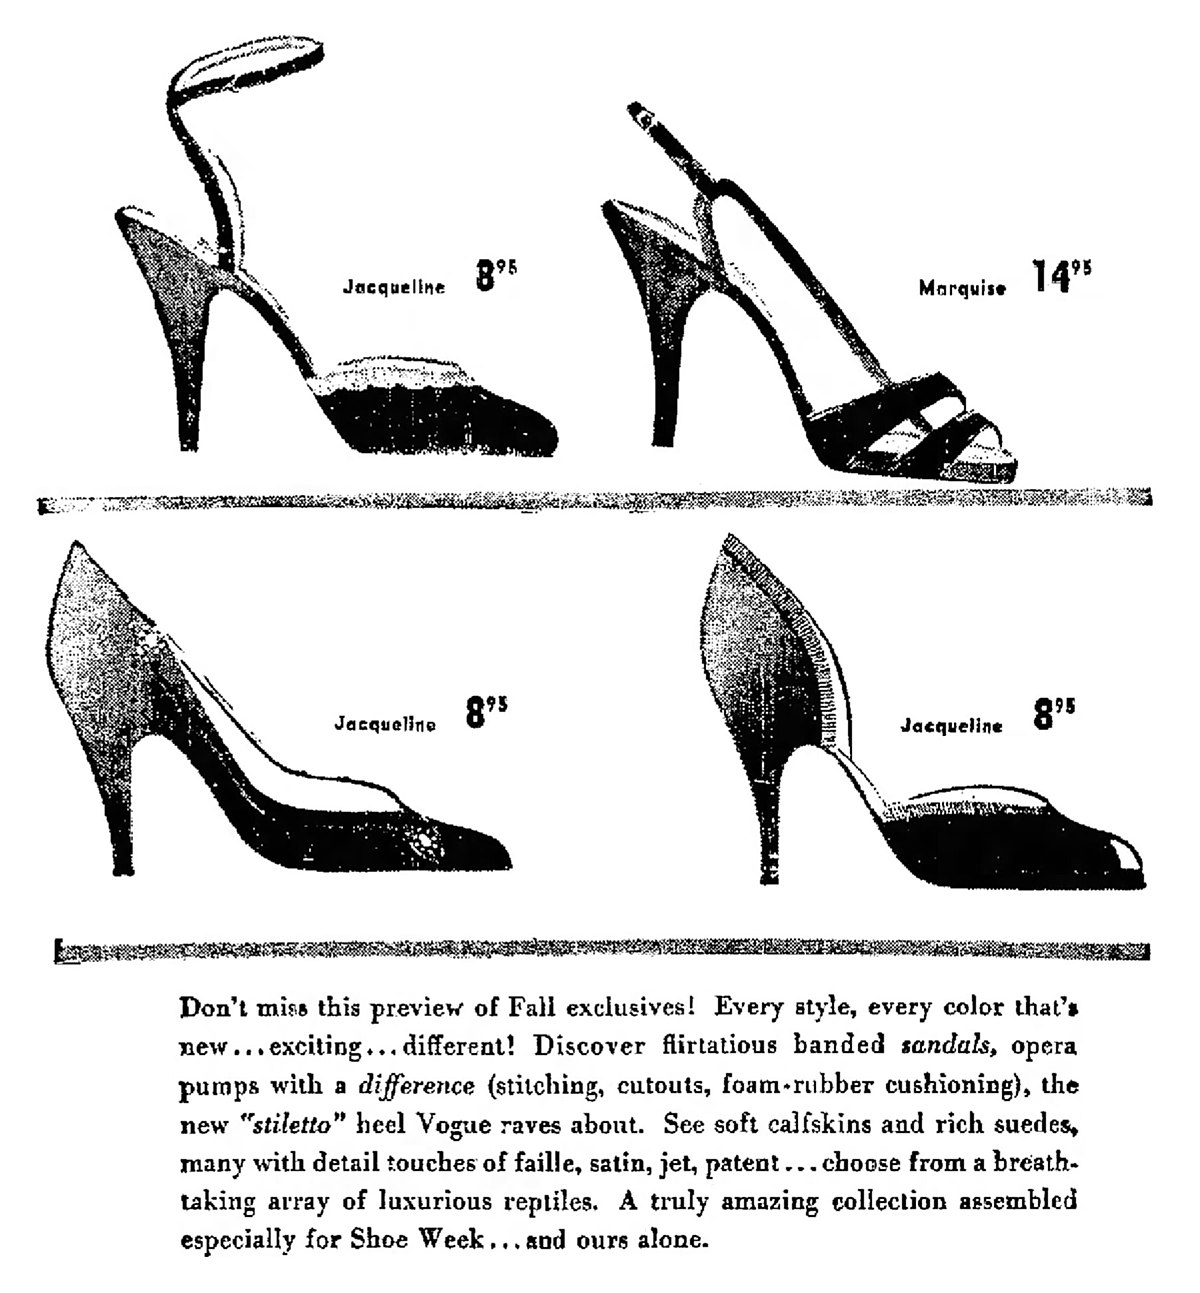 The History of High Heels | Middle Ages to Present Day - YouTube